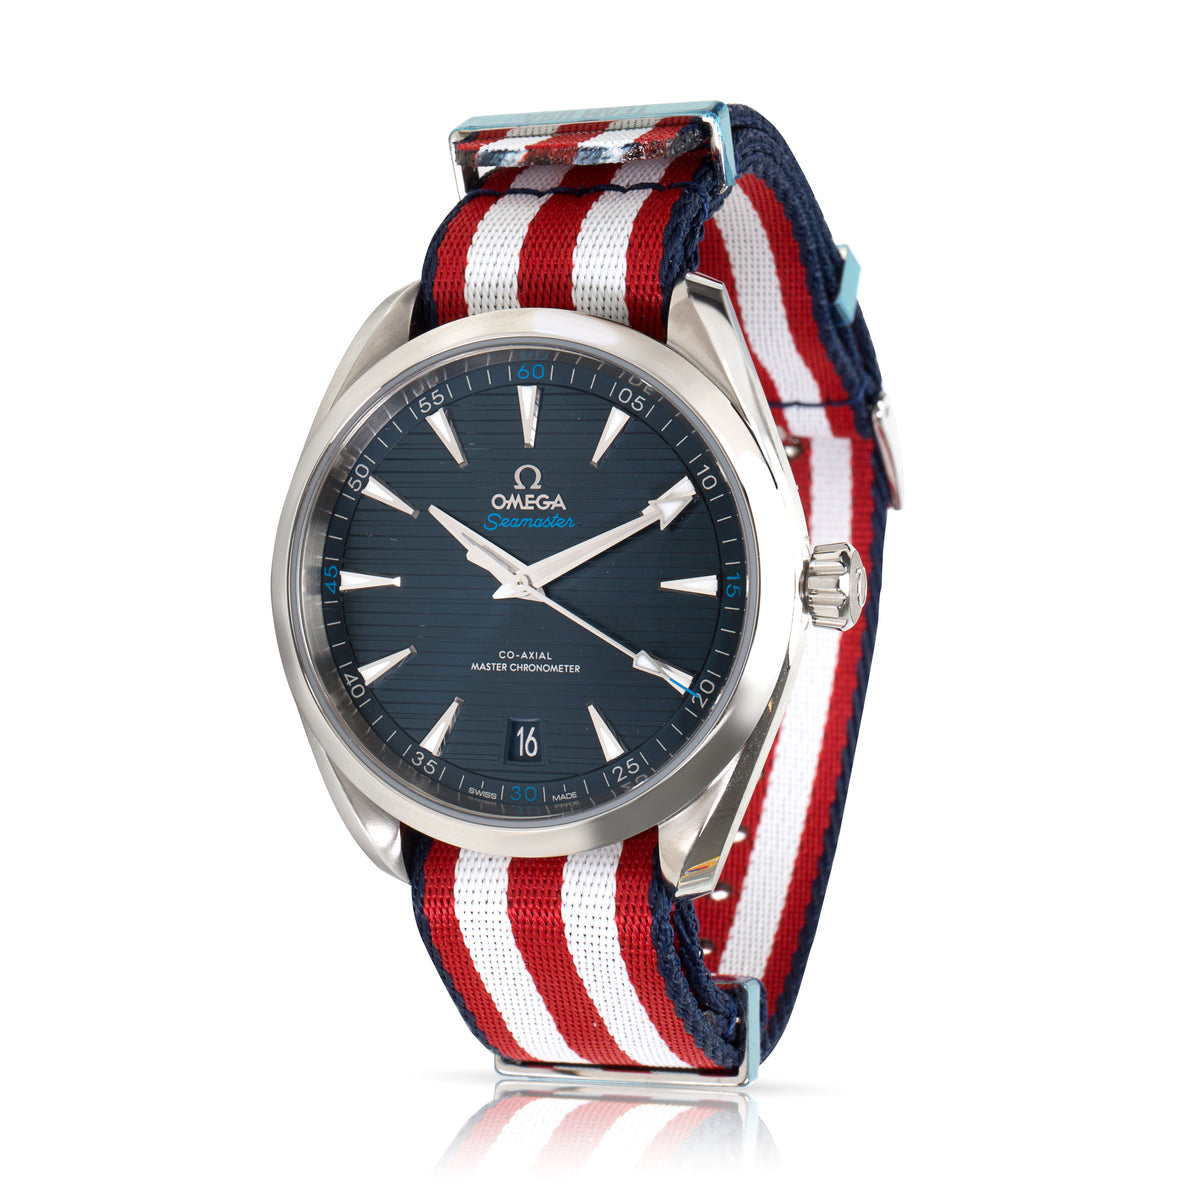 SPECIAL EDITION Omega Seamaster 220.12.41.21.03.003 Men's Watch